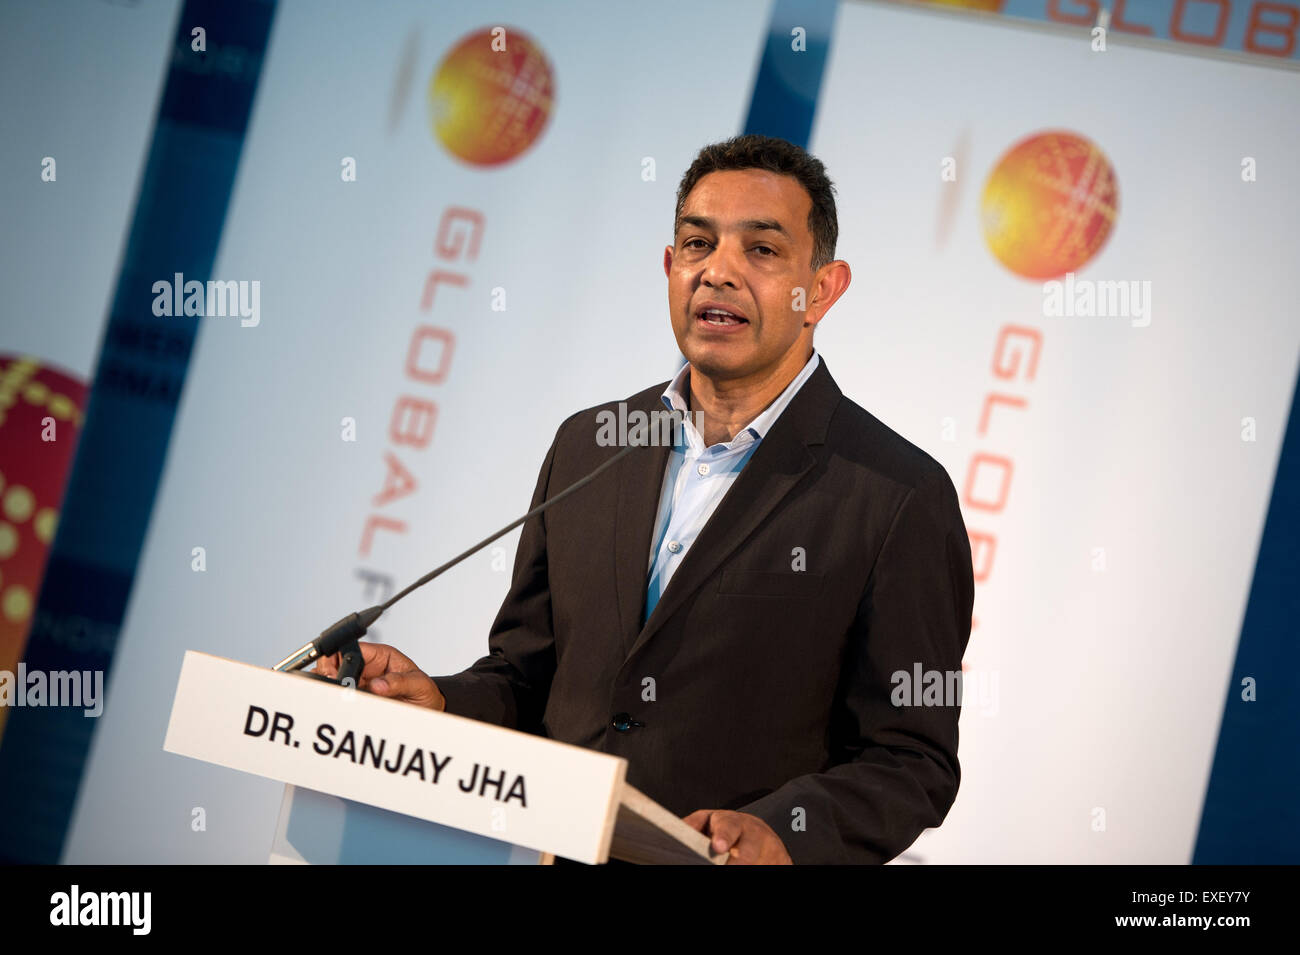 Dresden, Germany. 13th July, 2015. The CEO of Globalfoundries, Sanjay Jha, speaks during a press conference in Dresden, Germany, 13 July 2015. At the press conferenfce the new semi-conductor '22FDX' technology was introduced. Globalfoundaries plan an investment in Saxony until 2017 of around 250 million US dollars for the introduction of the technology-development the subsequent enlargement of their productions capacity, Photo: ARNO BURGI/dpa/Alamy Live News Stock Photo